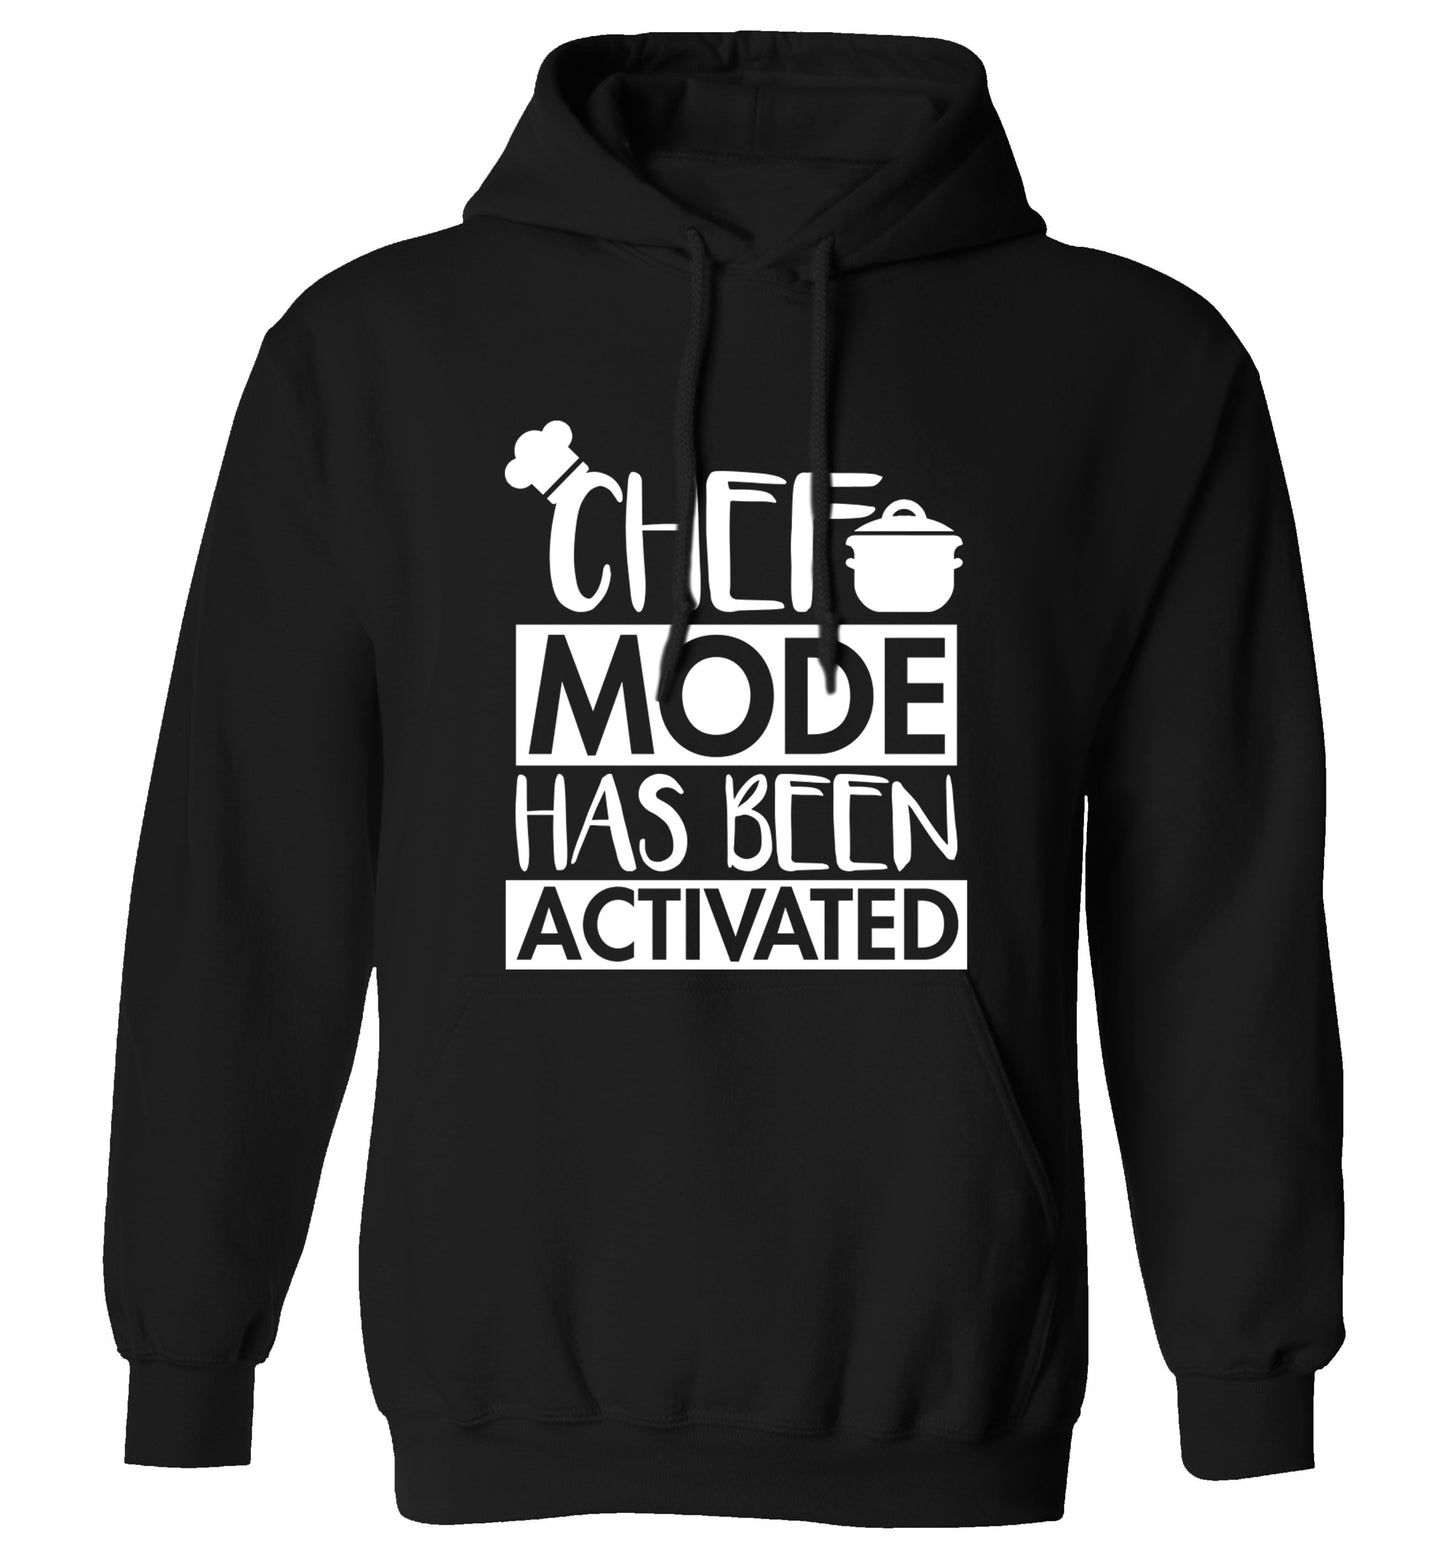 Chef mode has been activated adults unisex black hoodie 2XL